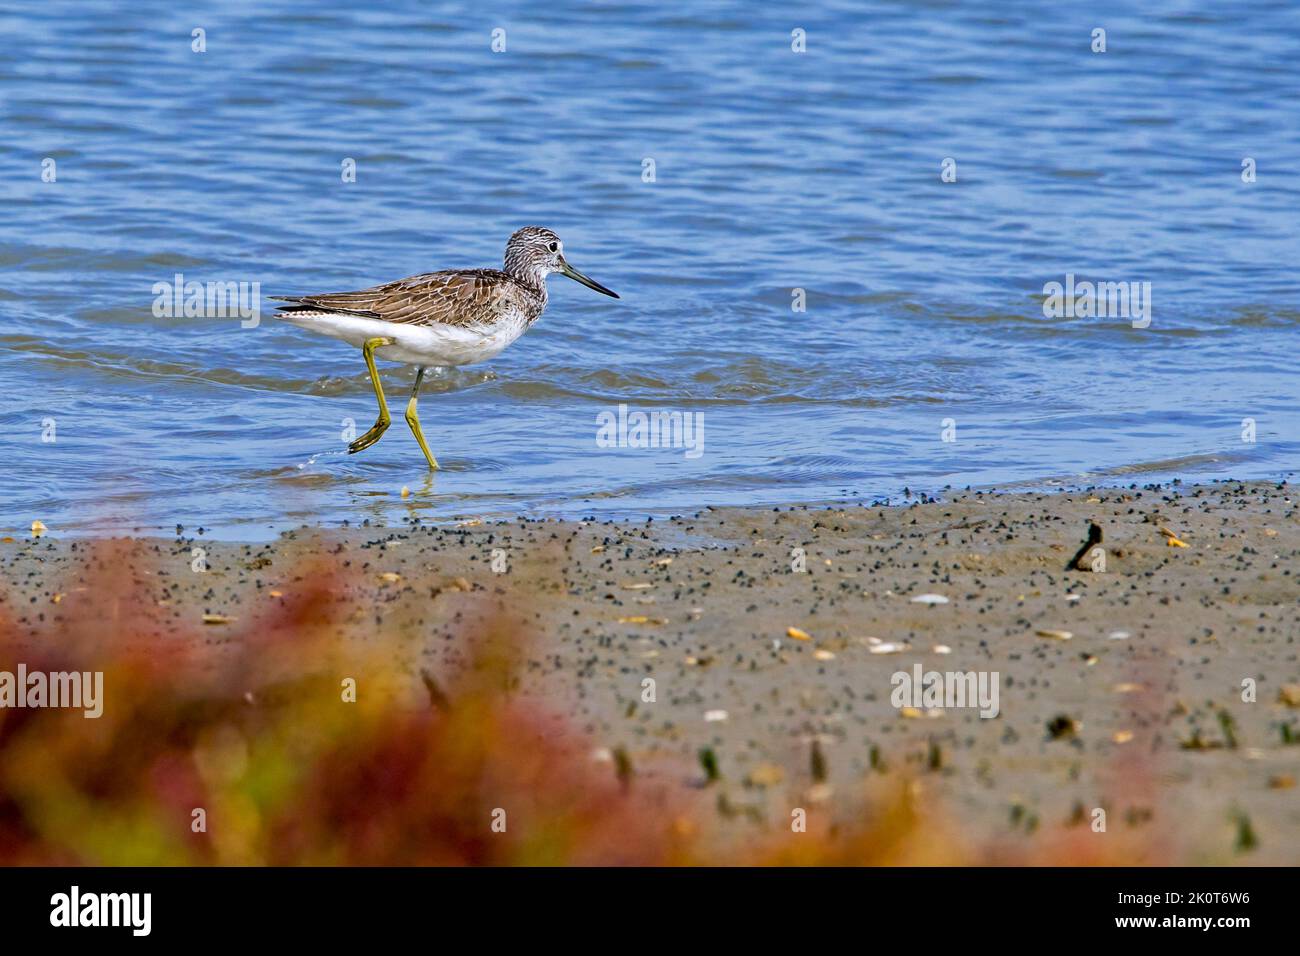 Common greenshank (Tringa nebularia) foraging in shallow water along lake shore in front of marsh samphire at saltmarsh in late summer / early autumn Stock Photo